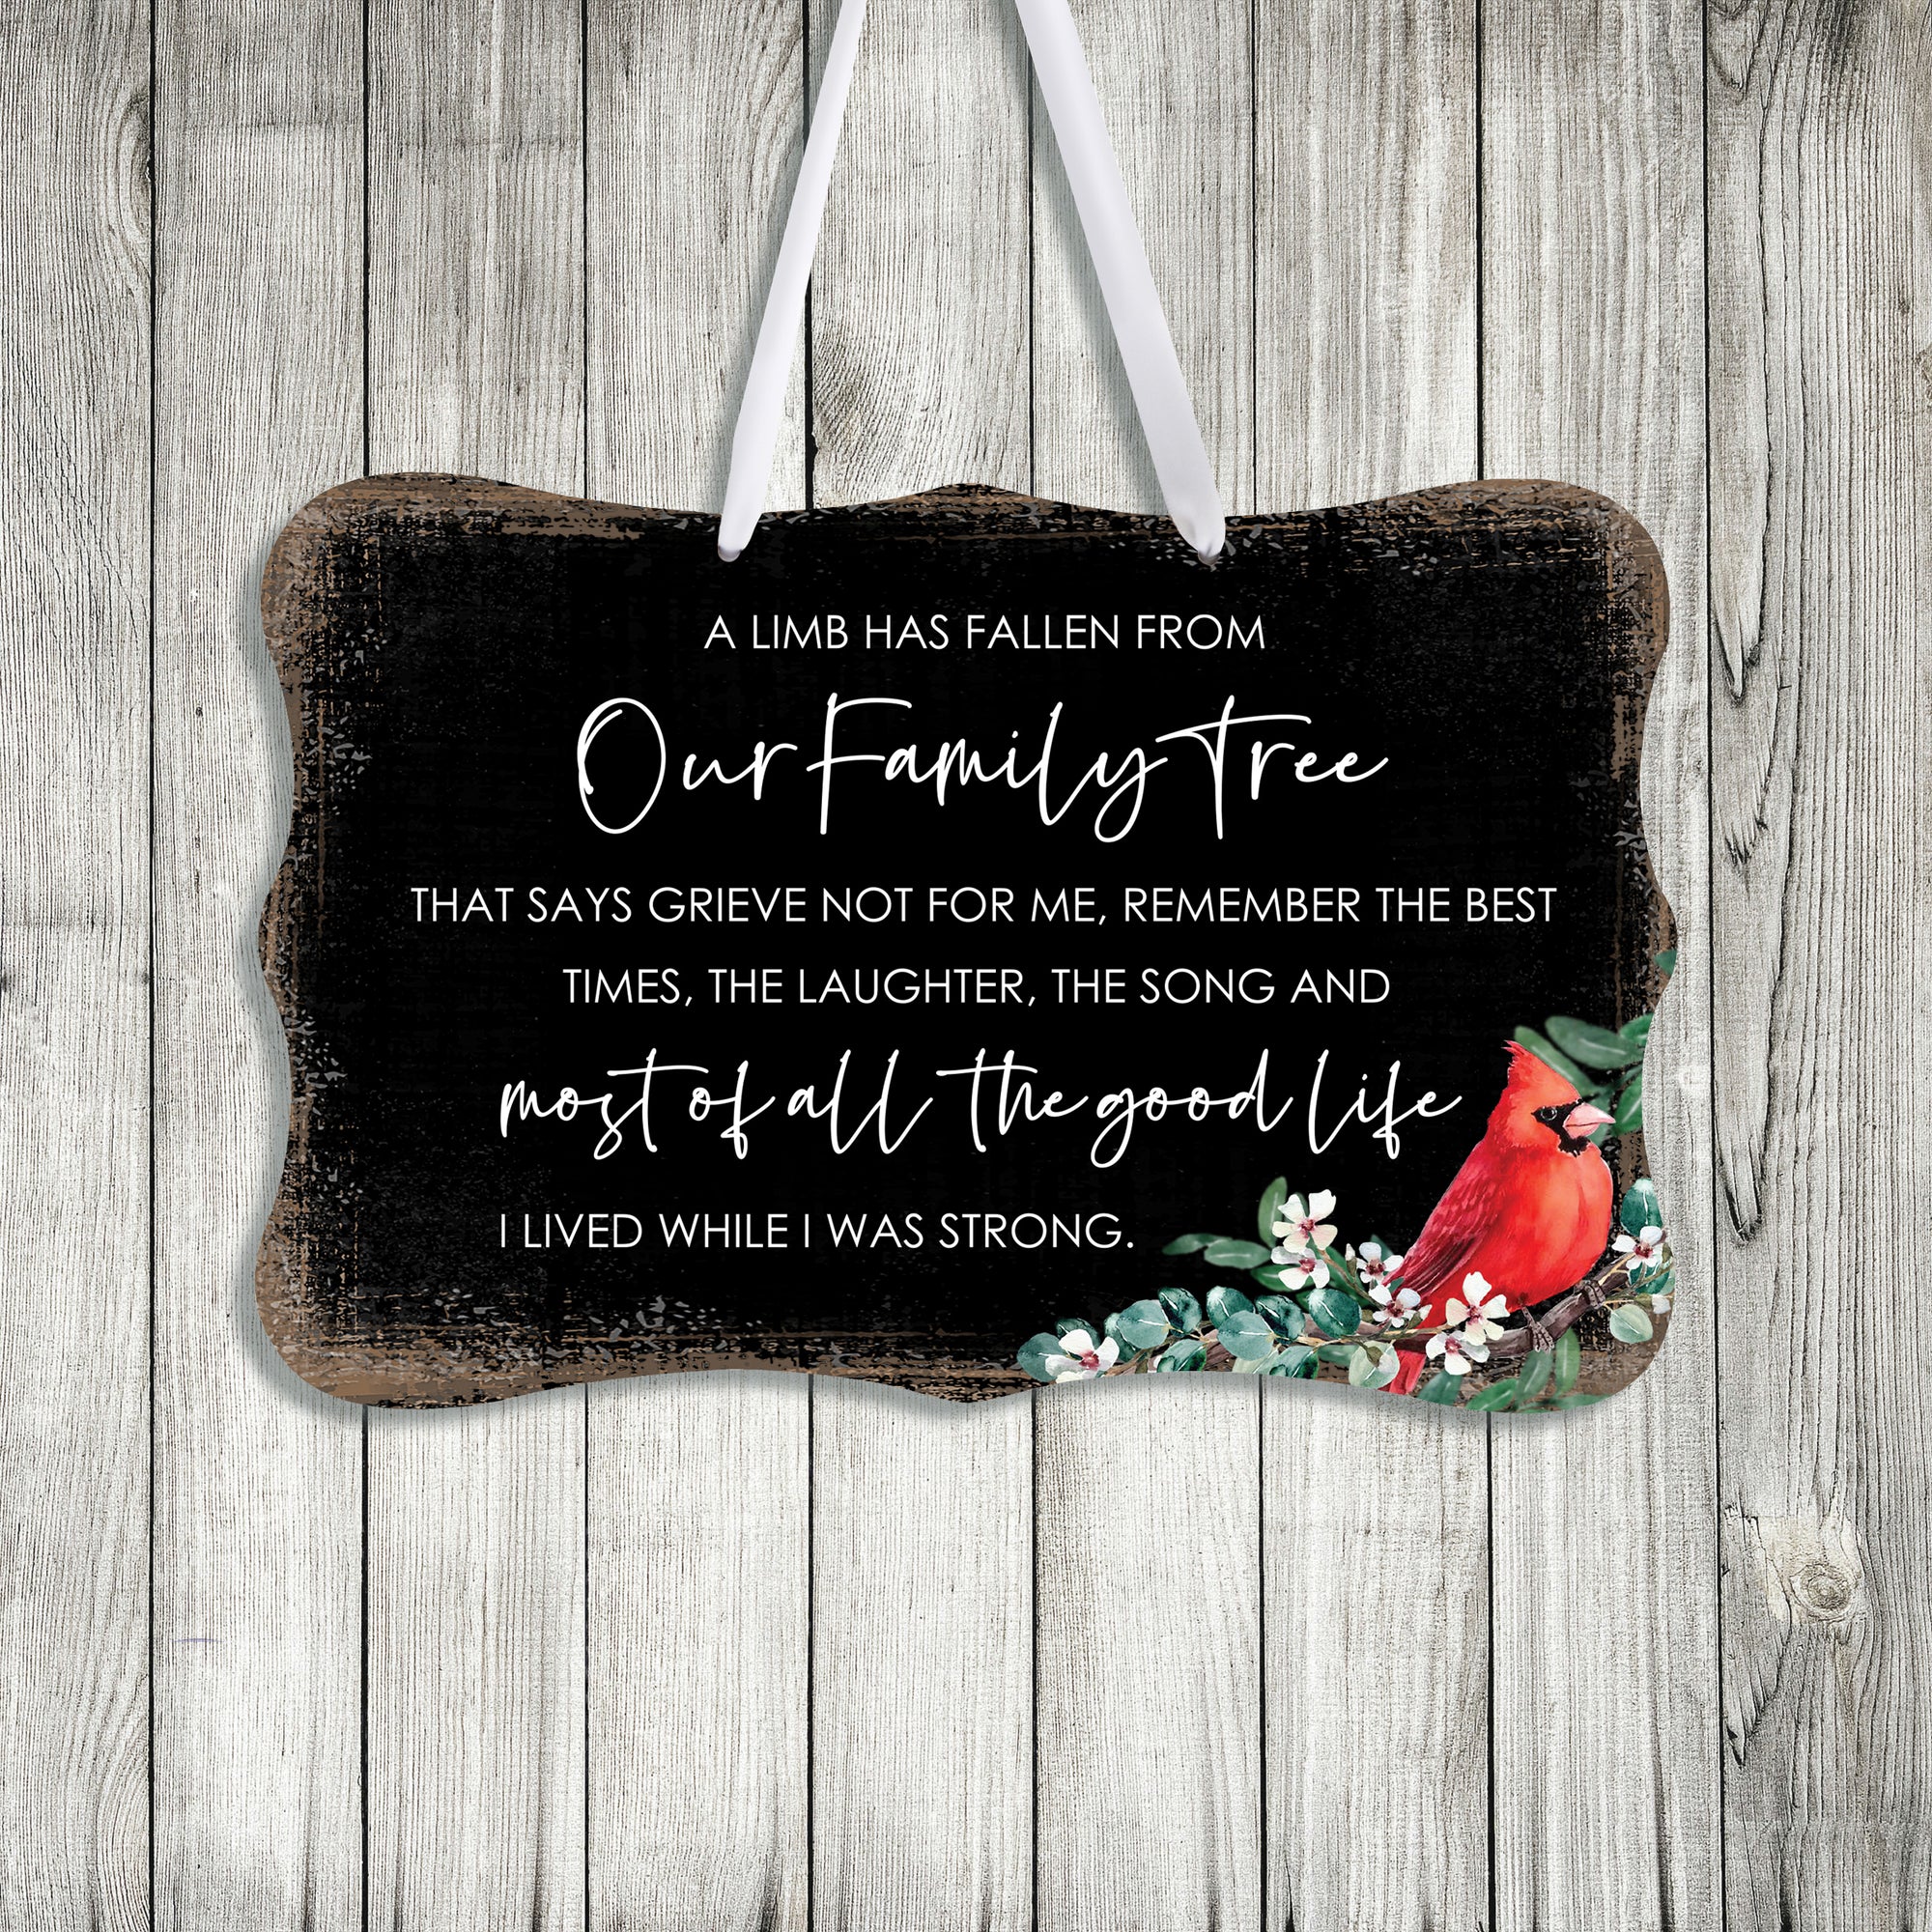 Funeral ribbon sign with a heartfelt message – a meaningful memorial tribute.